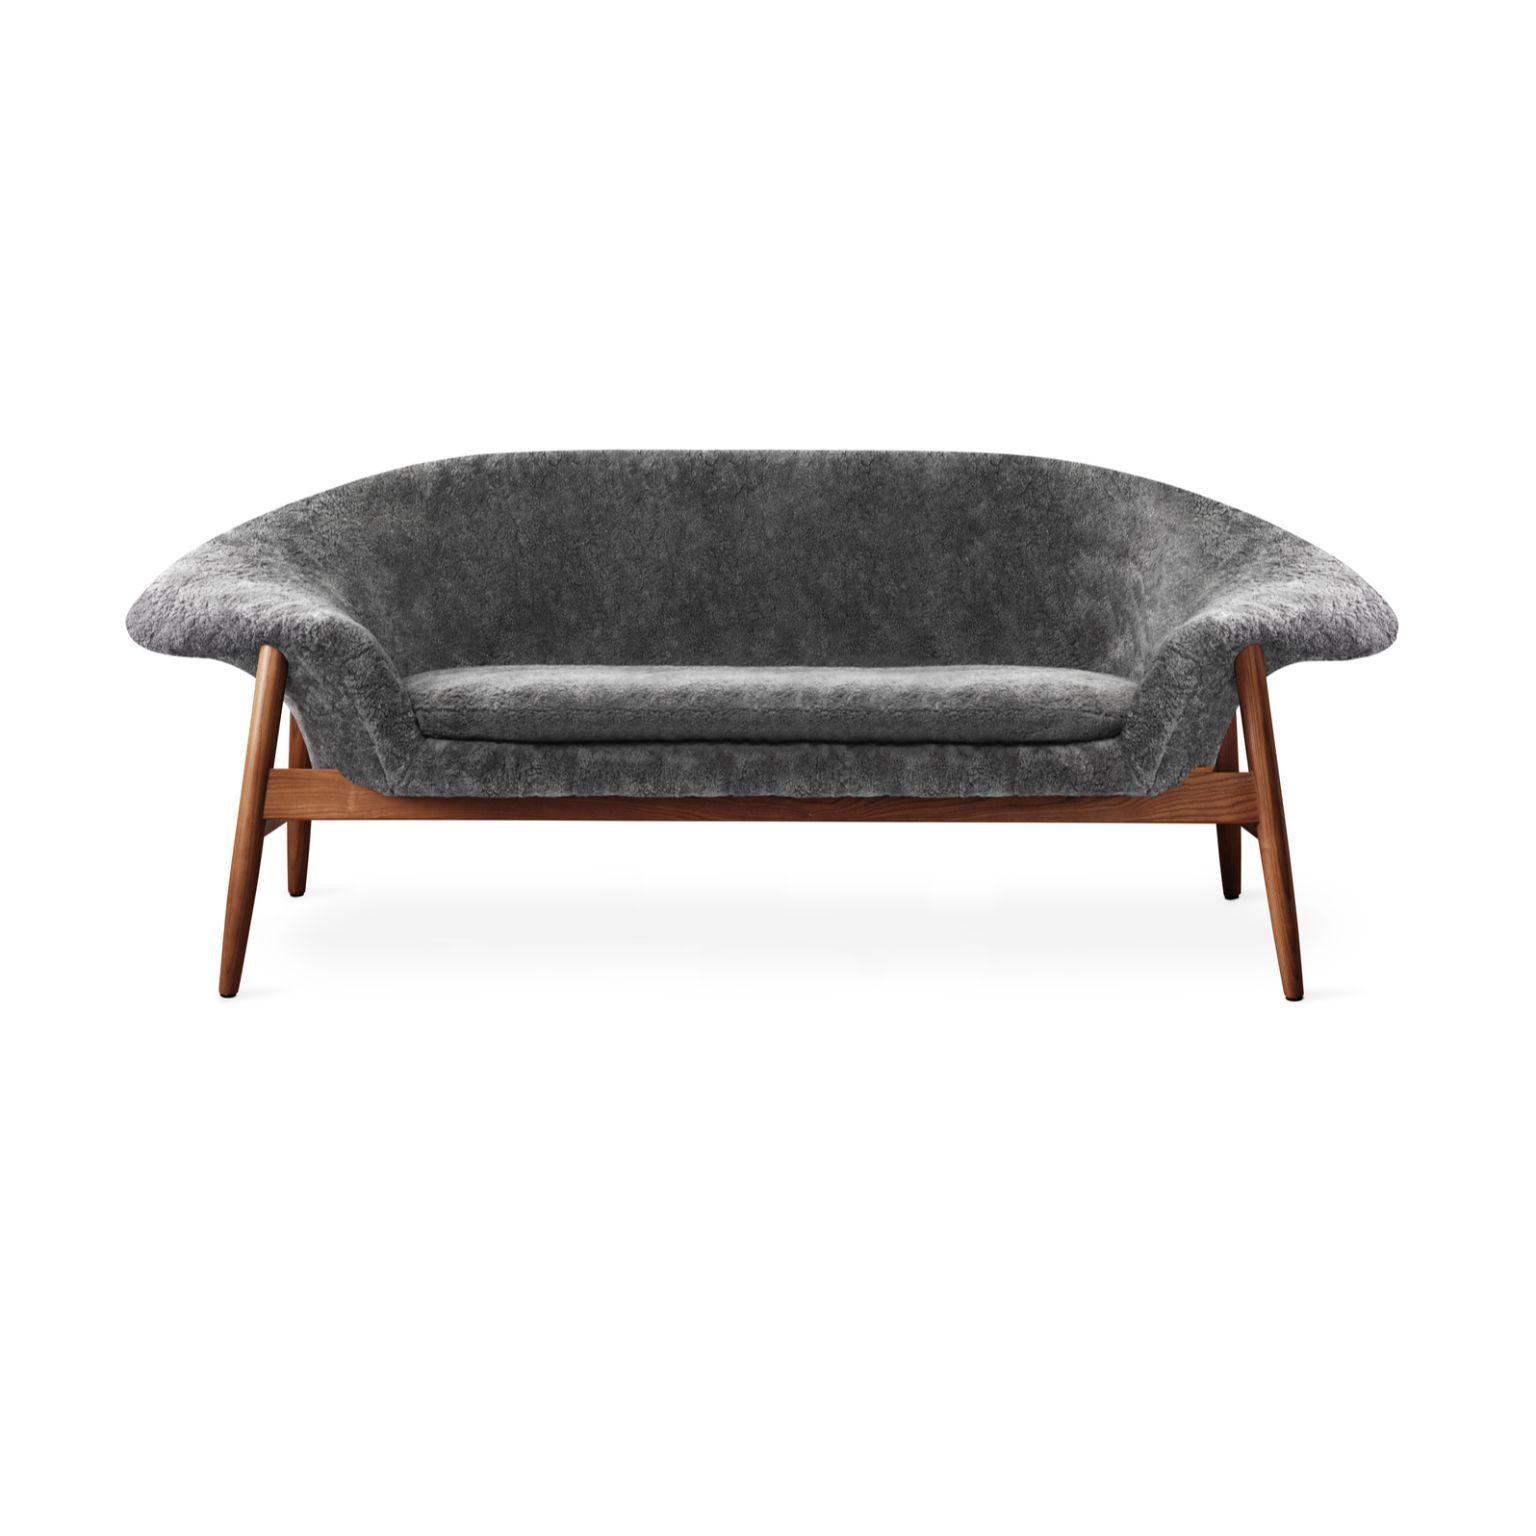 Fried egg sofa sheepskin Scandinavian grey by Warm Nordic
Dimensions: D186 x W68 x H 68 cm.
Material: Sheepskin upholstery, solid oiled teak.
Weight: 42 kg
Also available in different colours and finishes.

Warm Nordic is an ambitious design